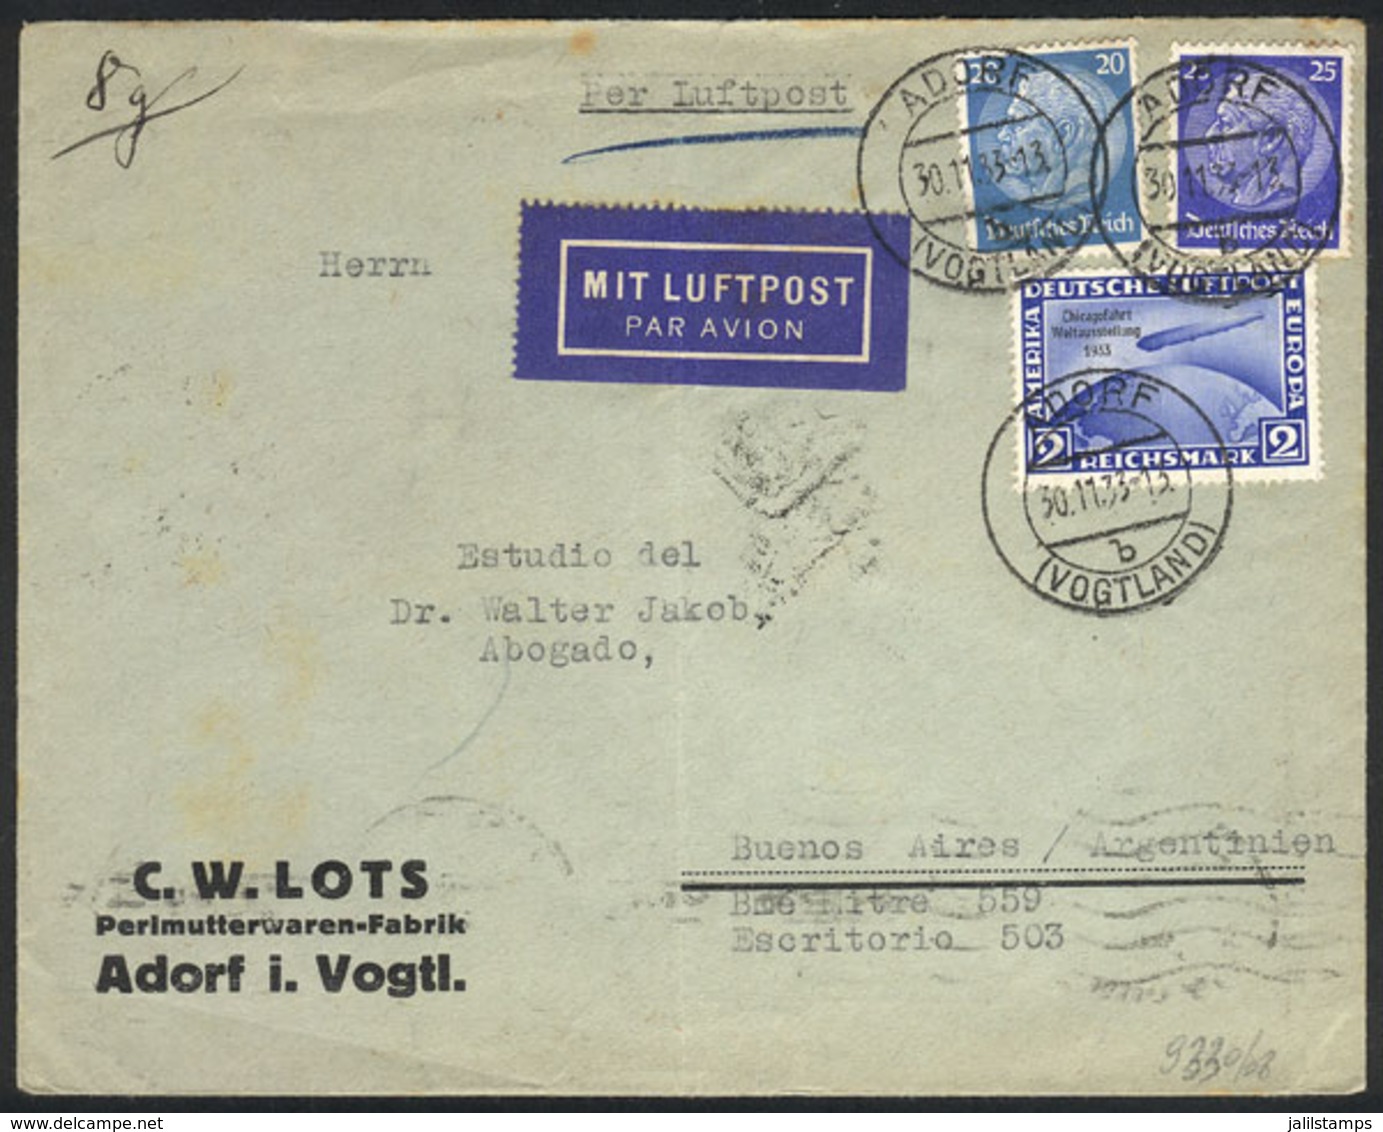 GERMANY: Airmail Cover Franked By Sc.C44 + Other Values (value US$275 On Cover), Sent From Adorf To Buenos Aires On 30/N - Vorphilatelie